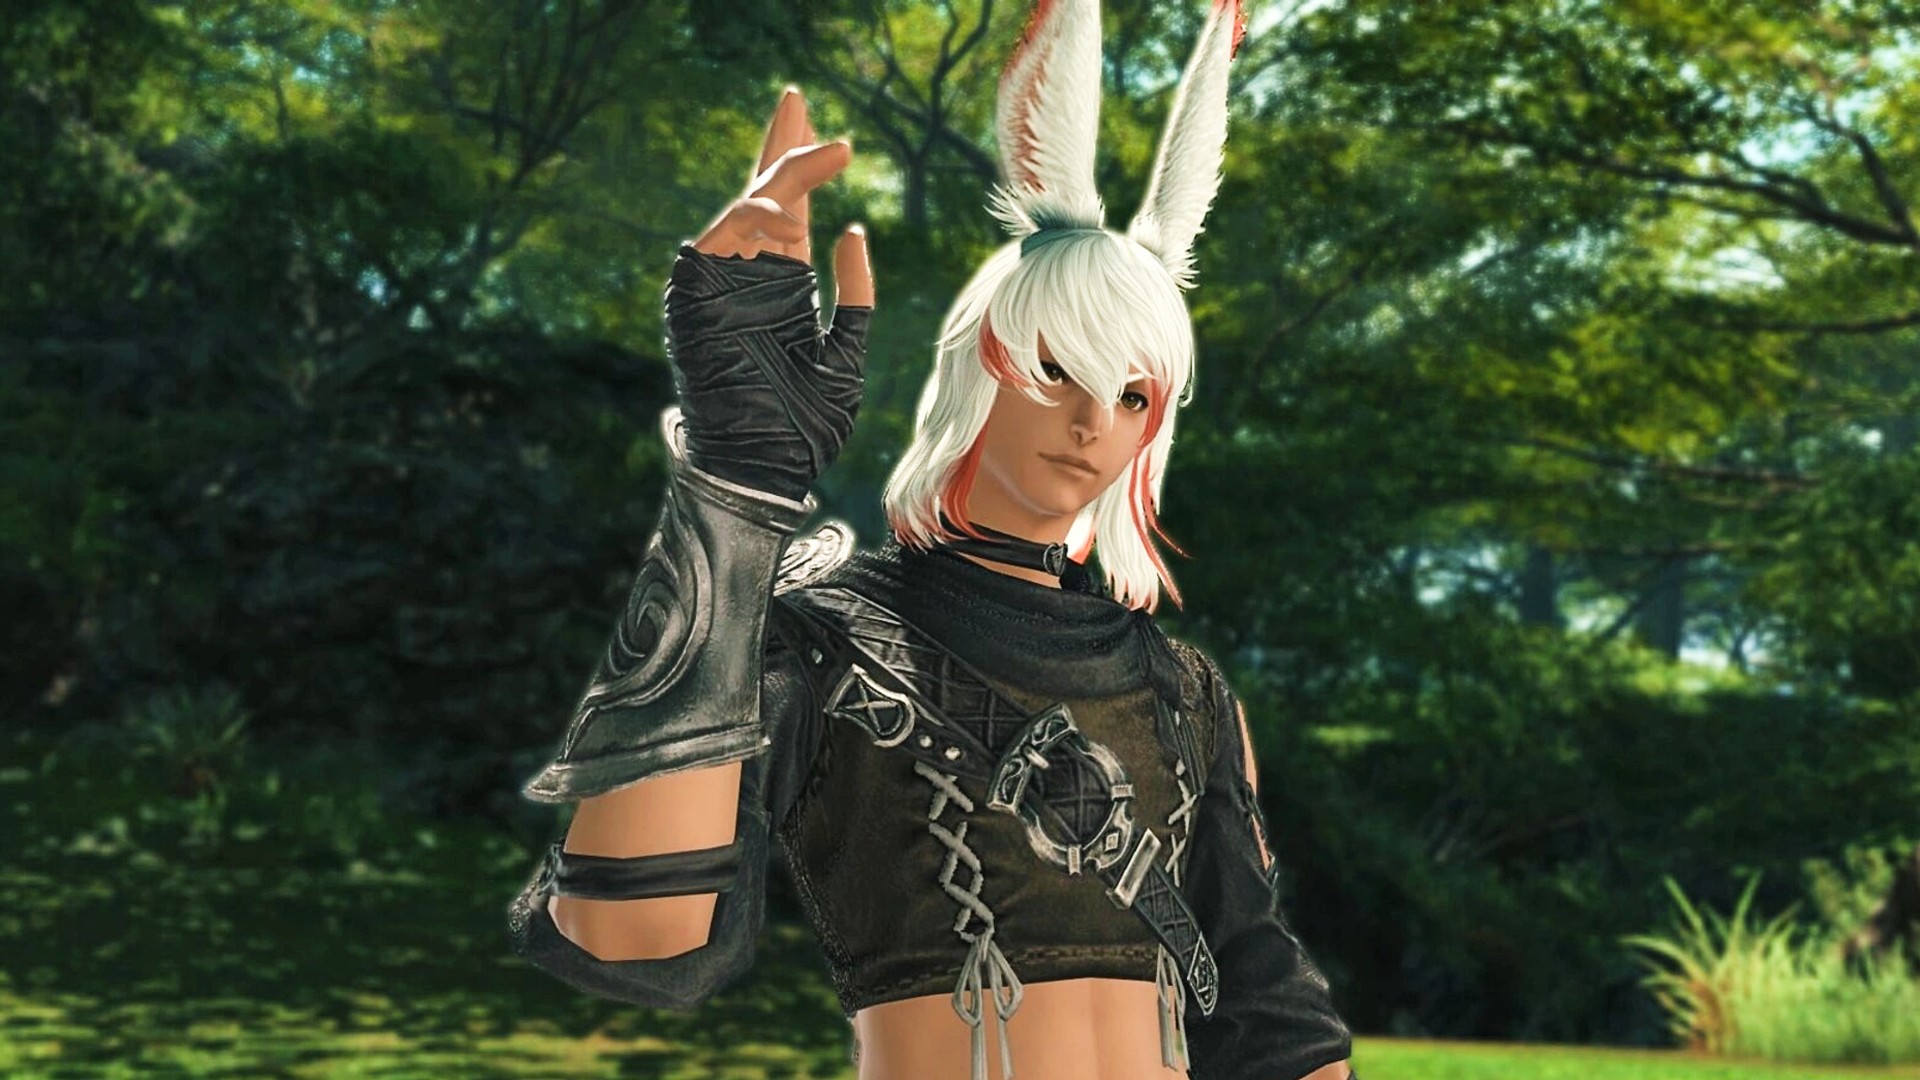 FFXIV is getting bunny boys because artists used their free time making it happen